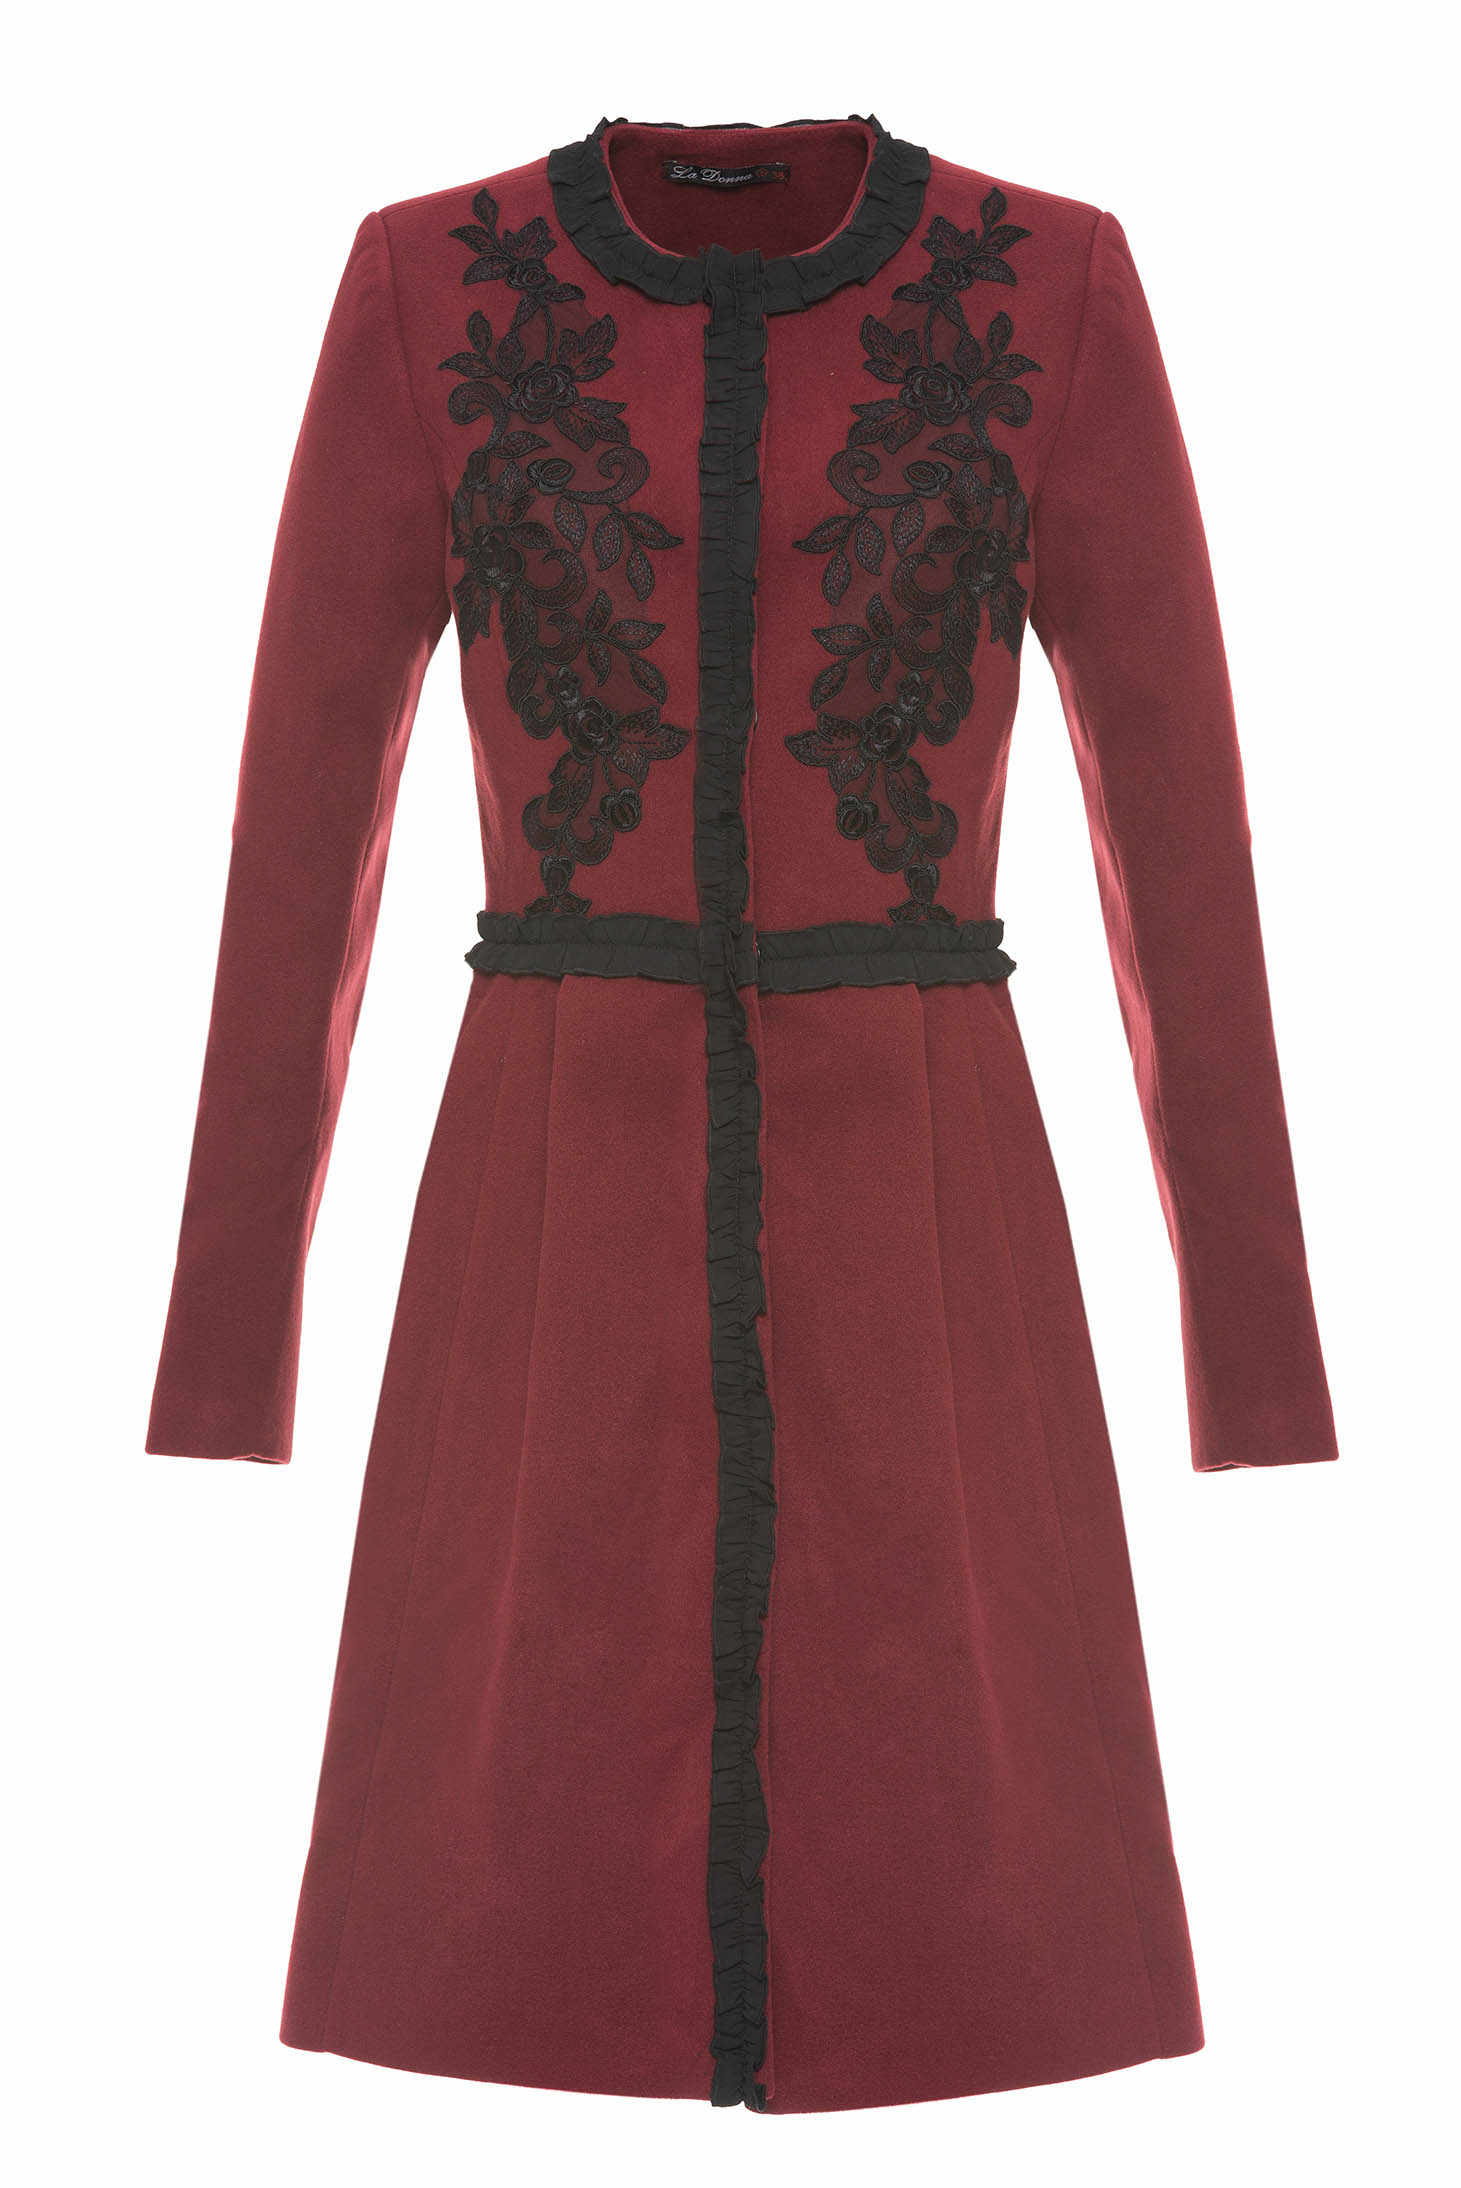 LaDonna Embroidered Fall Burgundy Coat